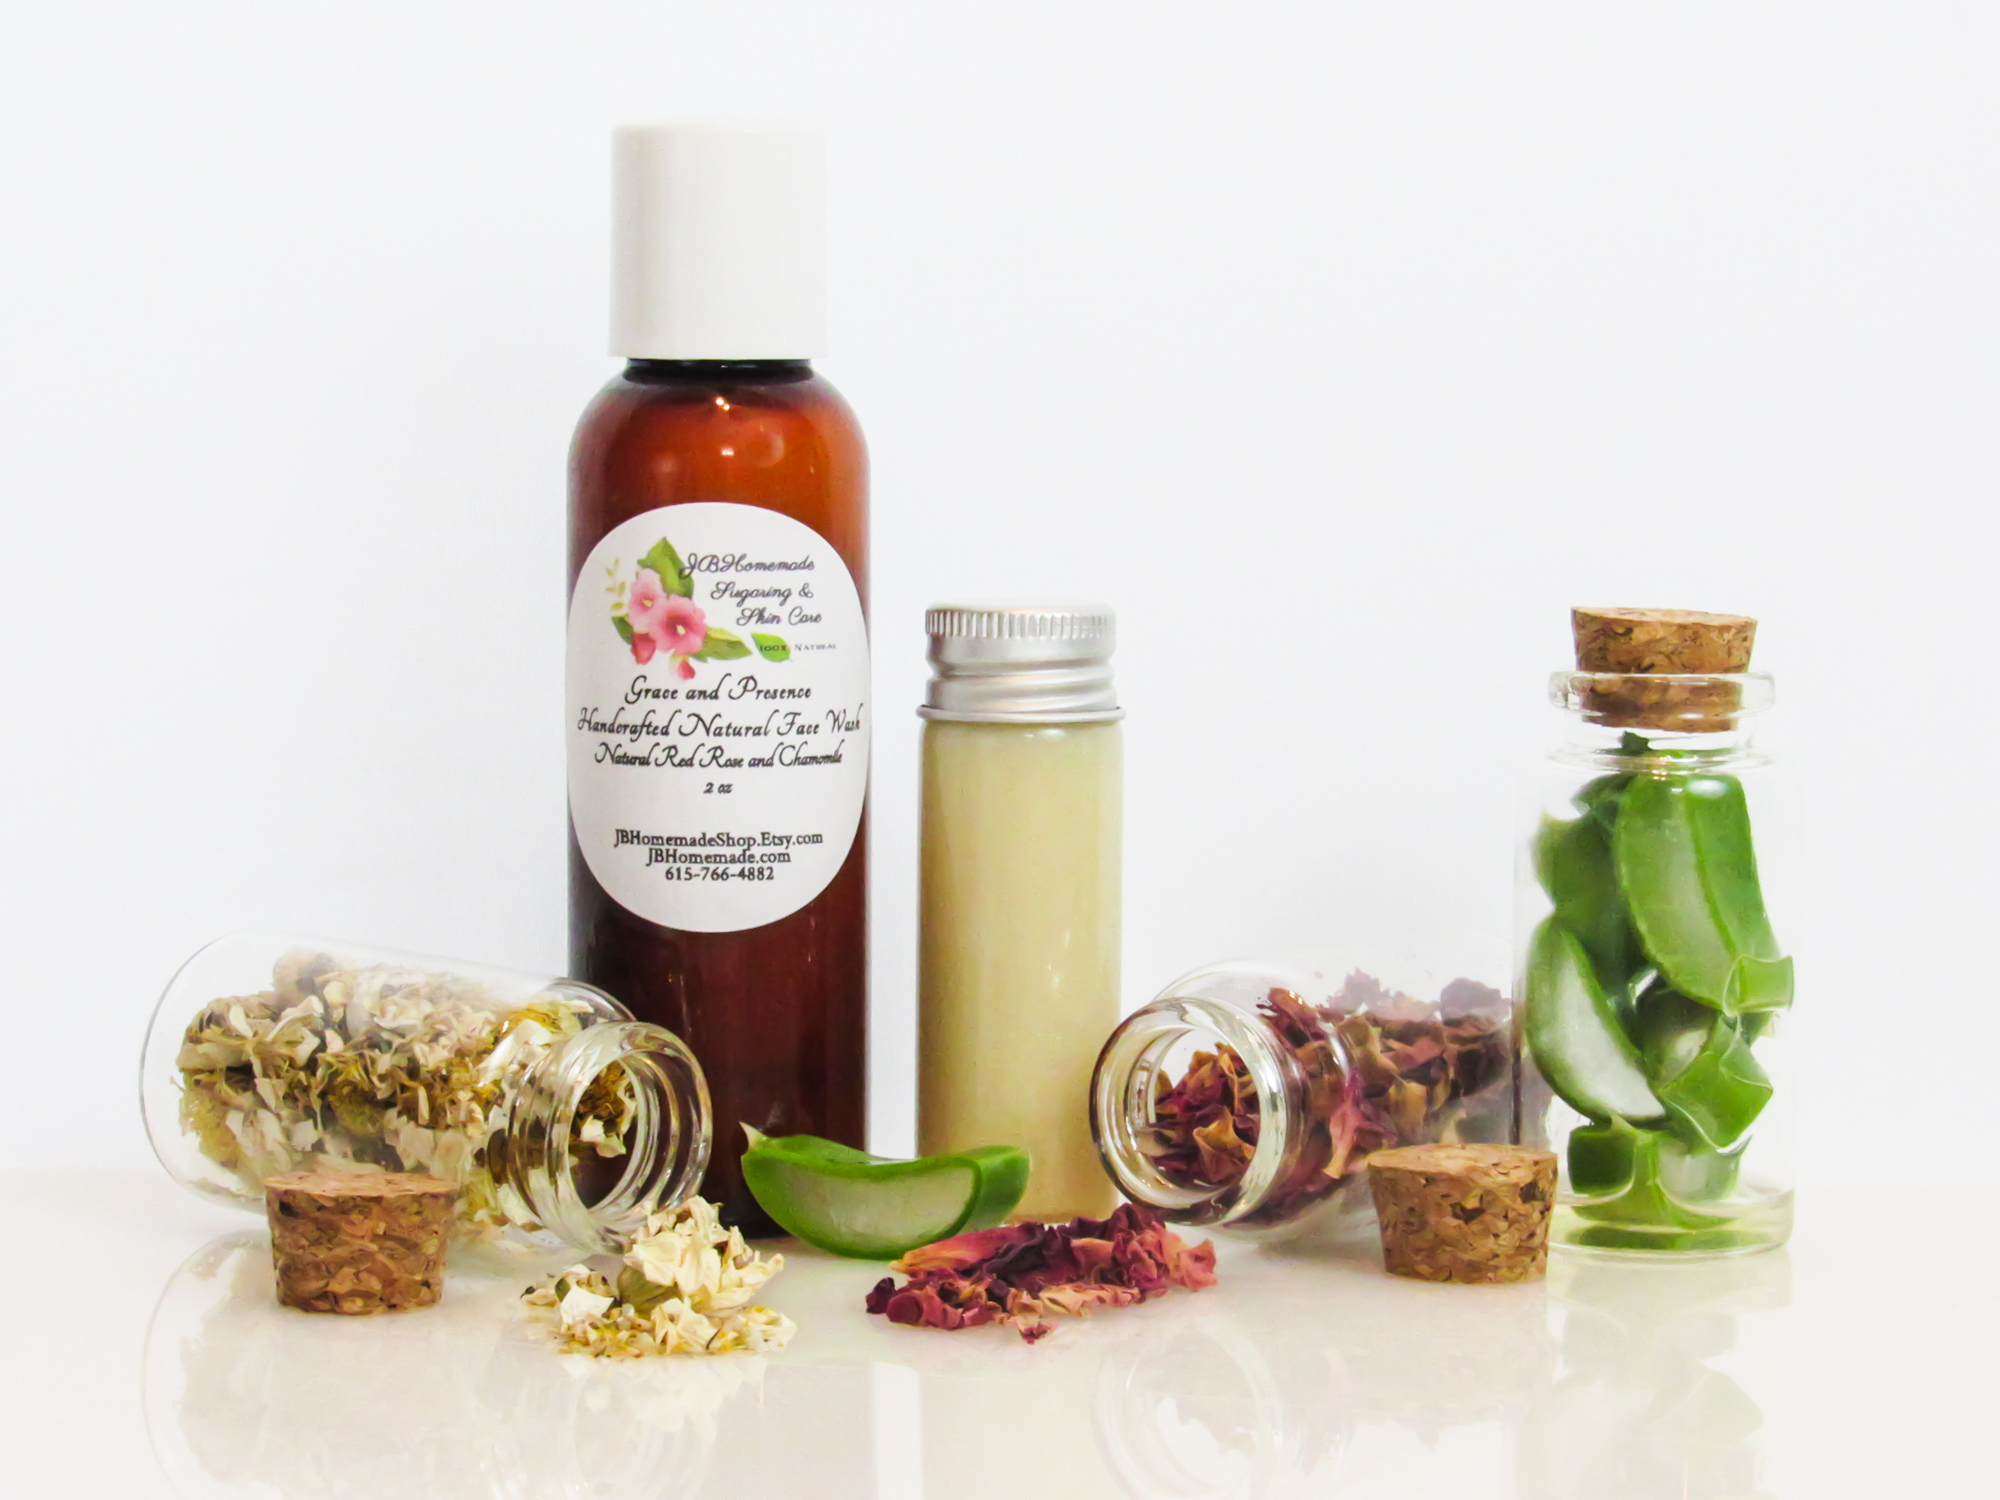 A front view of an all-natural facial cleanser in an amber bottle surrounded by small, corked glass bottles containing sprinkles of Red Rose, Aloe Vera and Chamomile ingredients. A clear glass bottle showcases the face wash's color and texture.